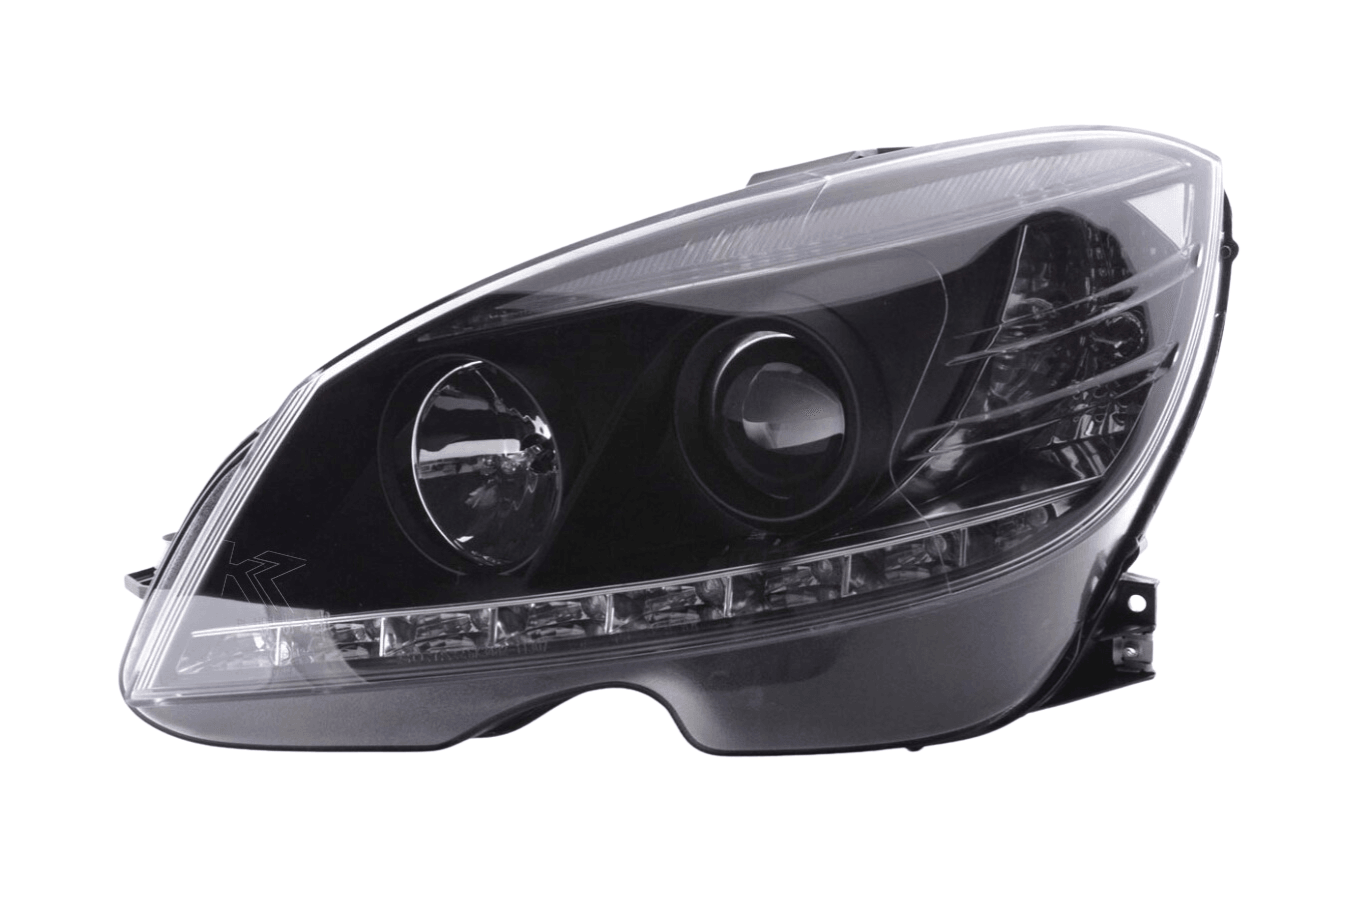 Mercedes Benz C-Class (204) Black LED Headlights with Daytime Running Lights (2007-2010) - K2 Industries